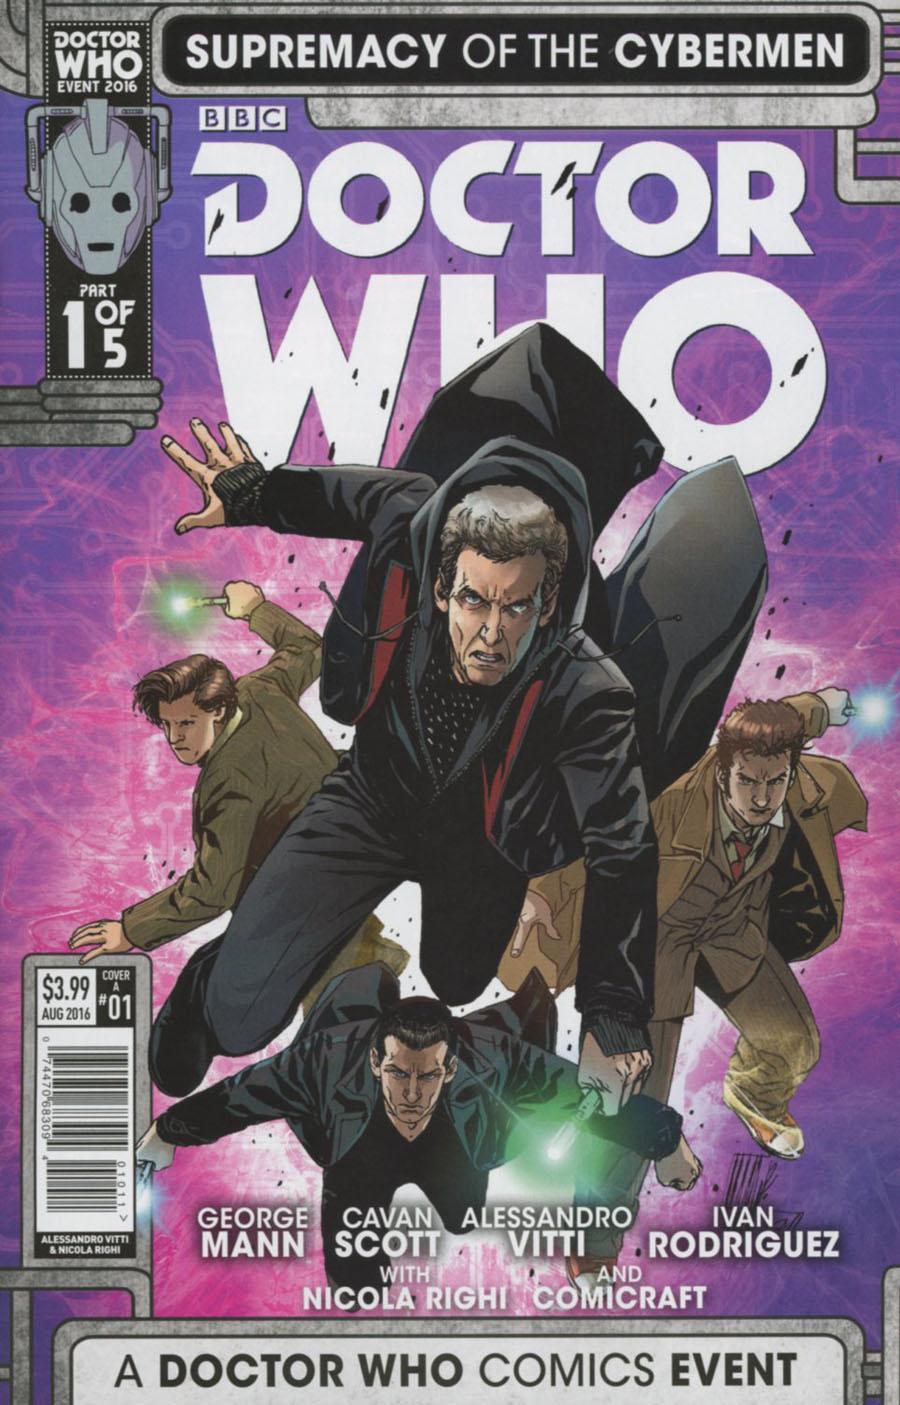 Doctor Who Event 2016 Supremacy Of The Cybermen Vol. 1 #1